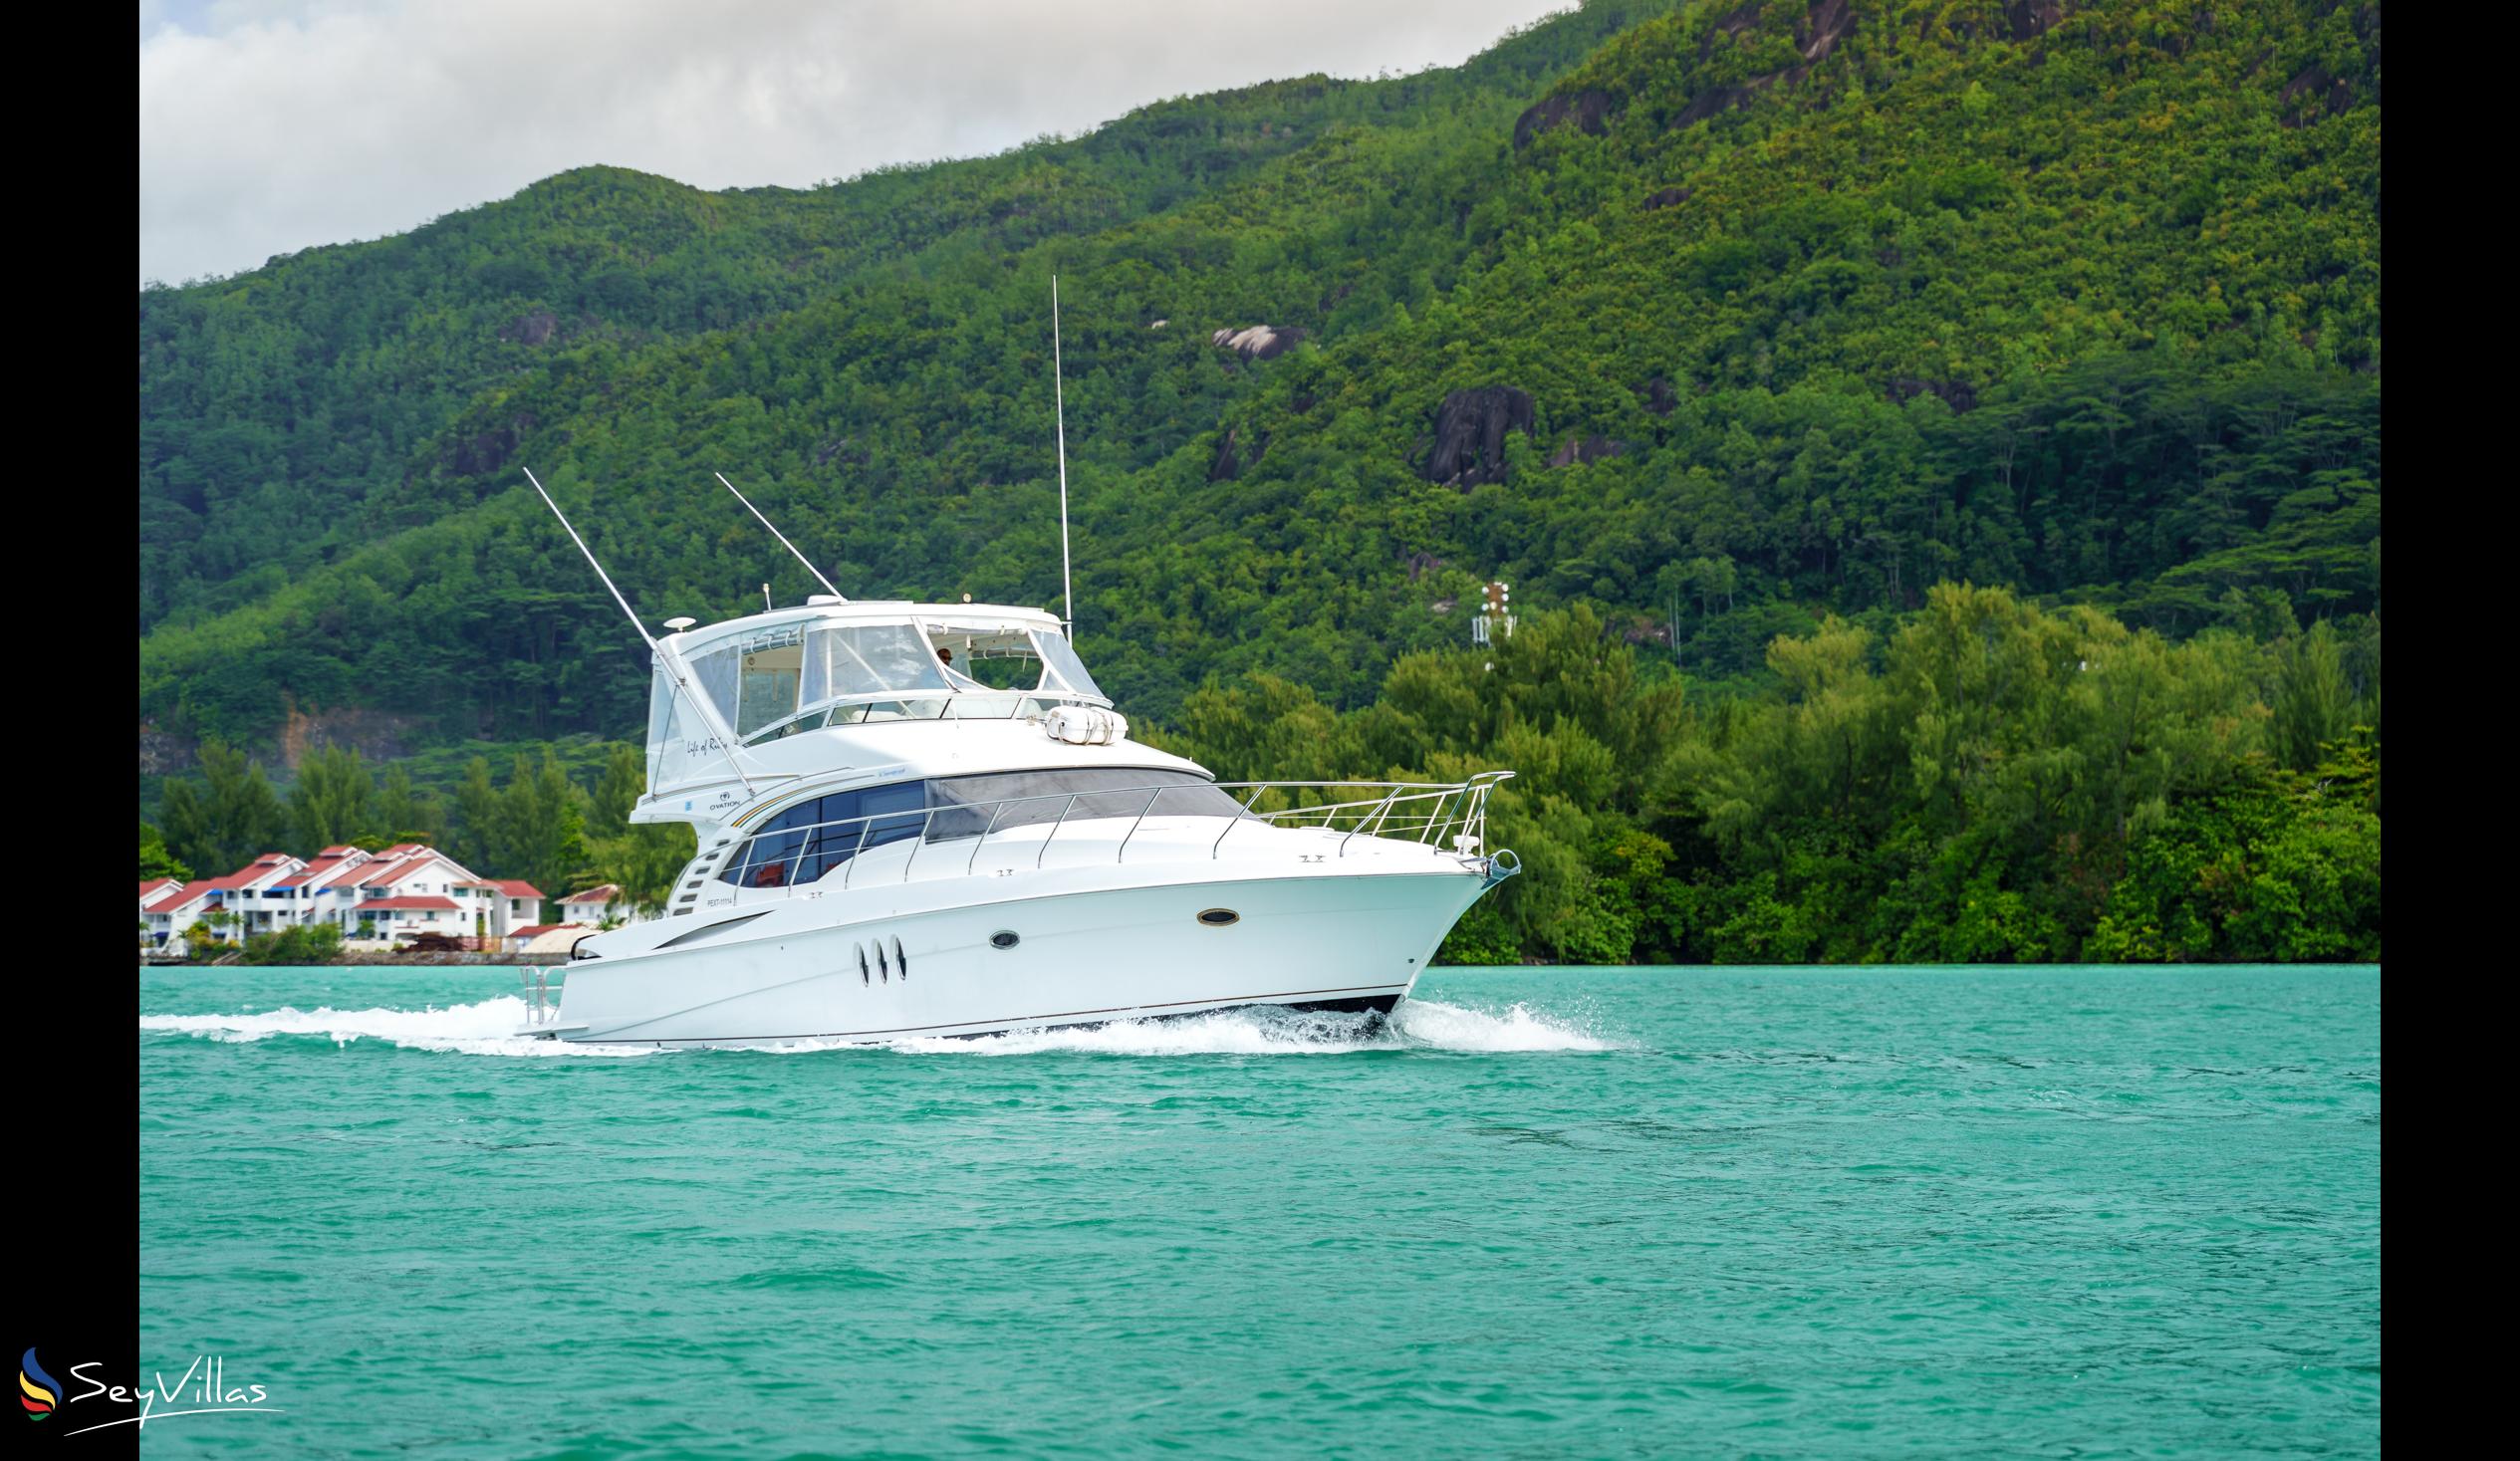 Foto 41: Seyscapes Yacht Charter - Charter Complet Life of Riley - Seychelles (Seychelles)